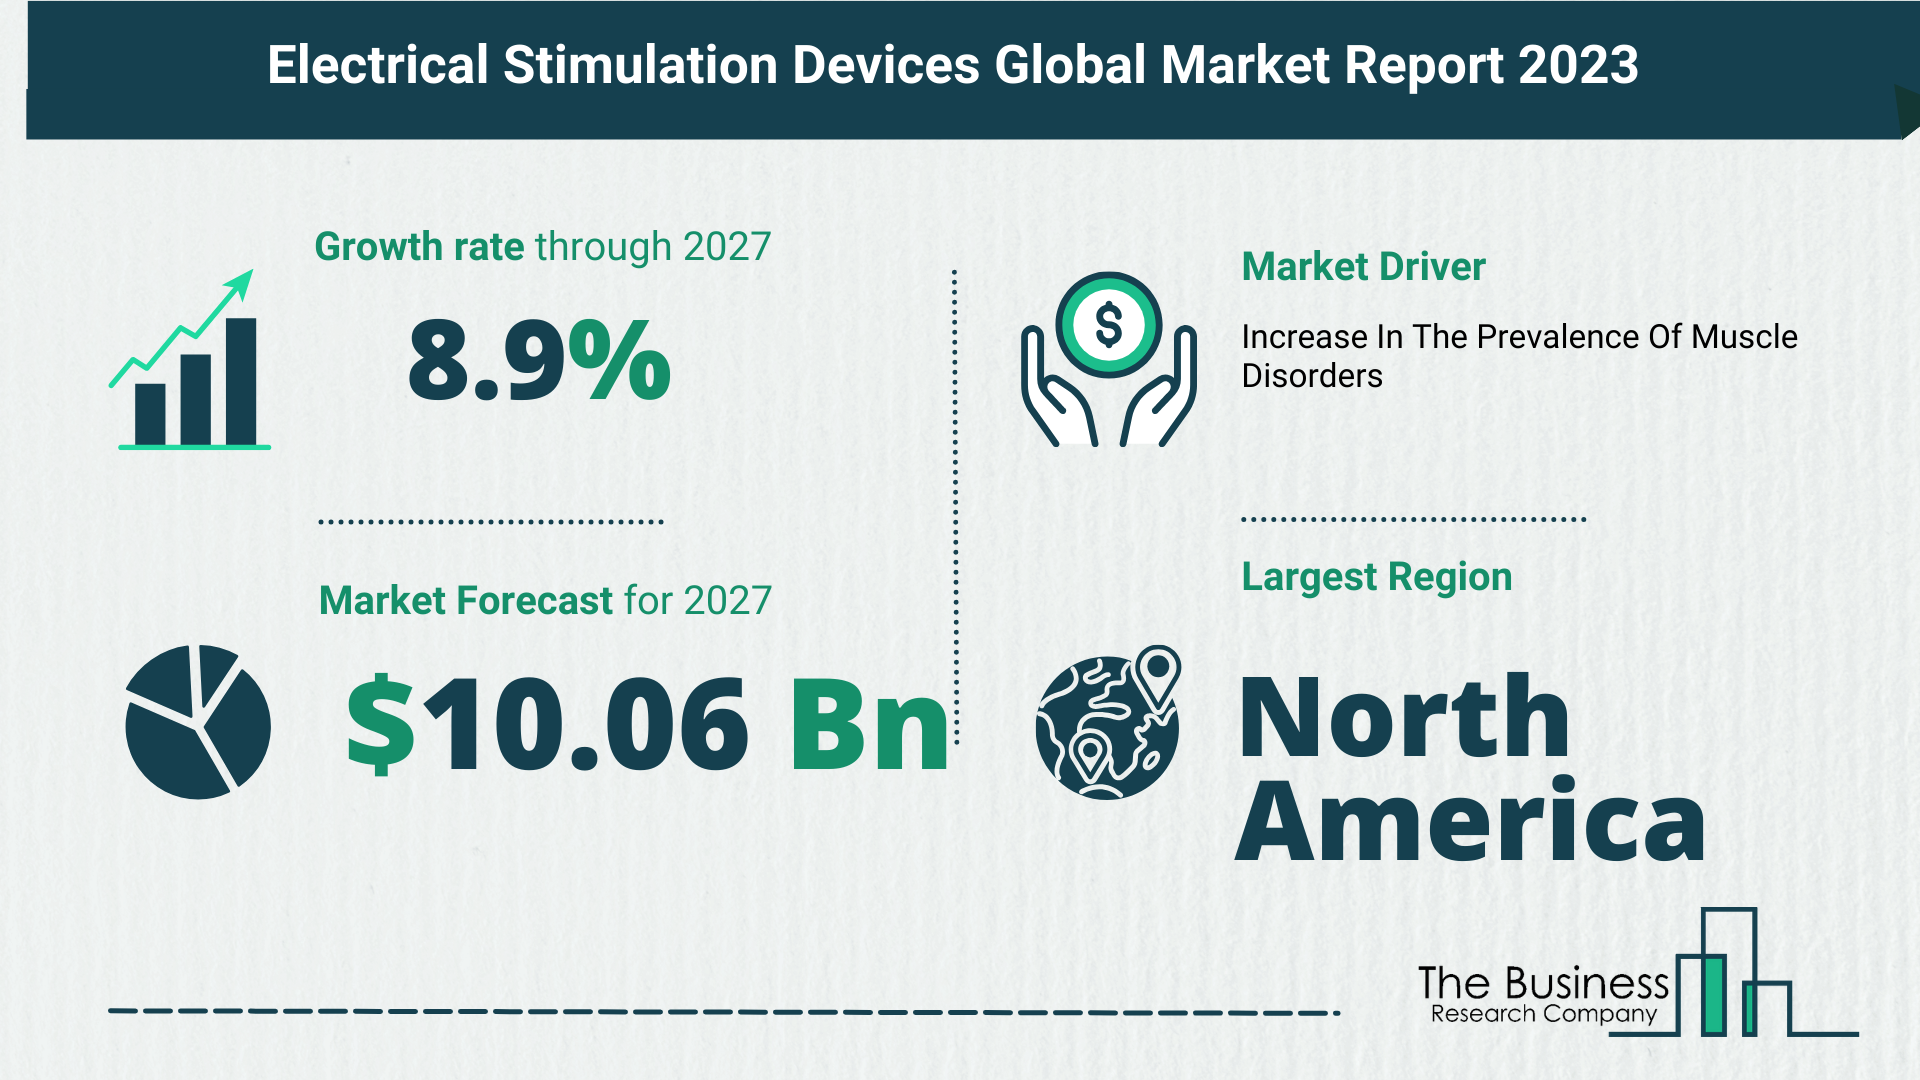 How Will The Electrical Stimulation Devices Market Size Grow In The Coming Years?